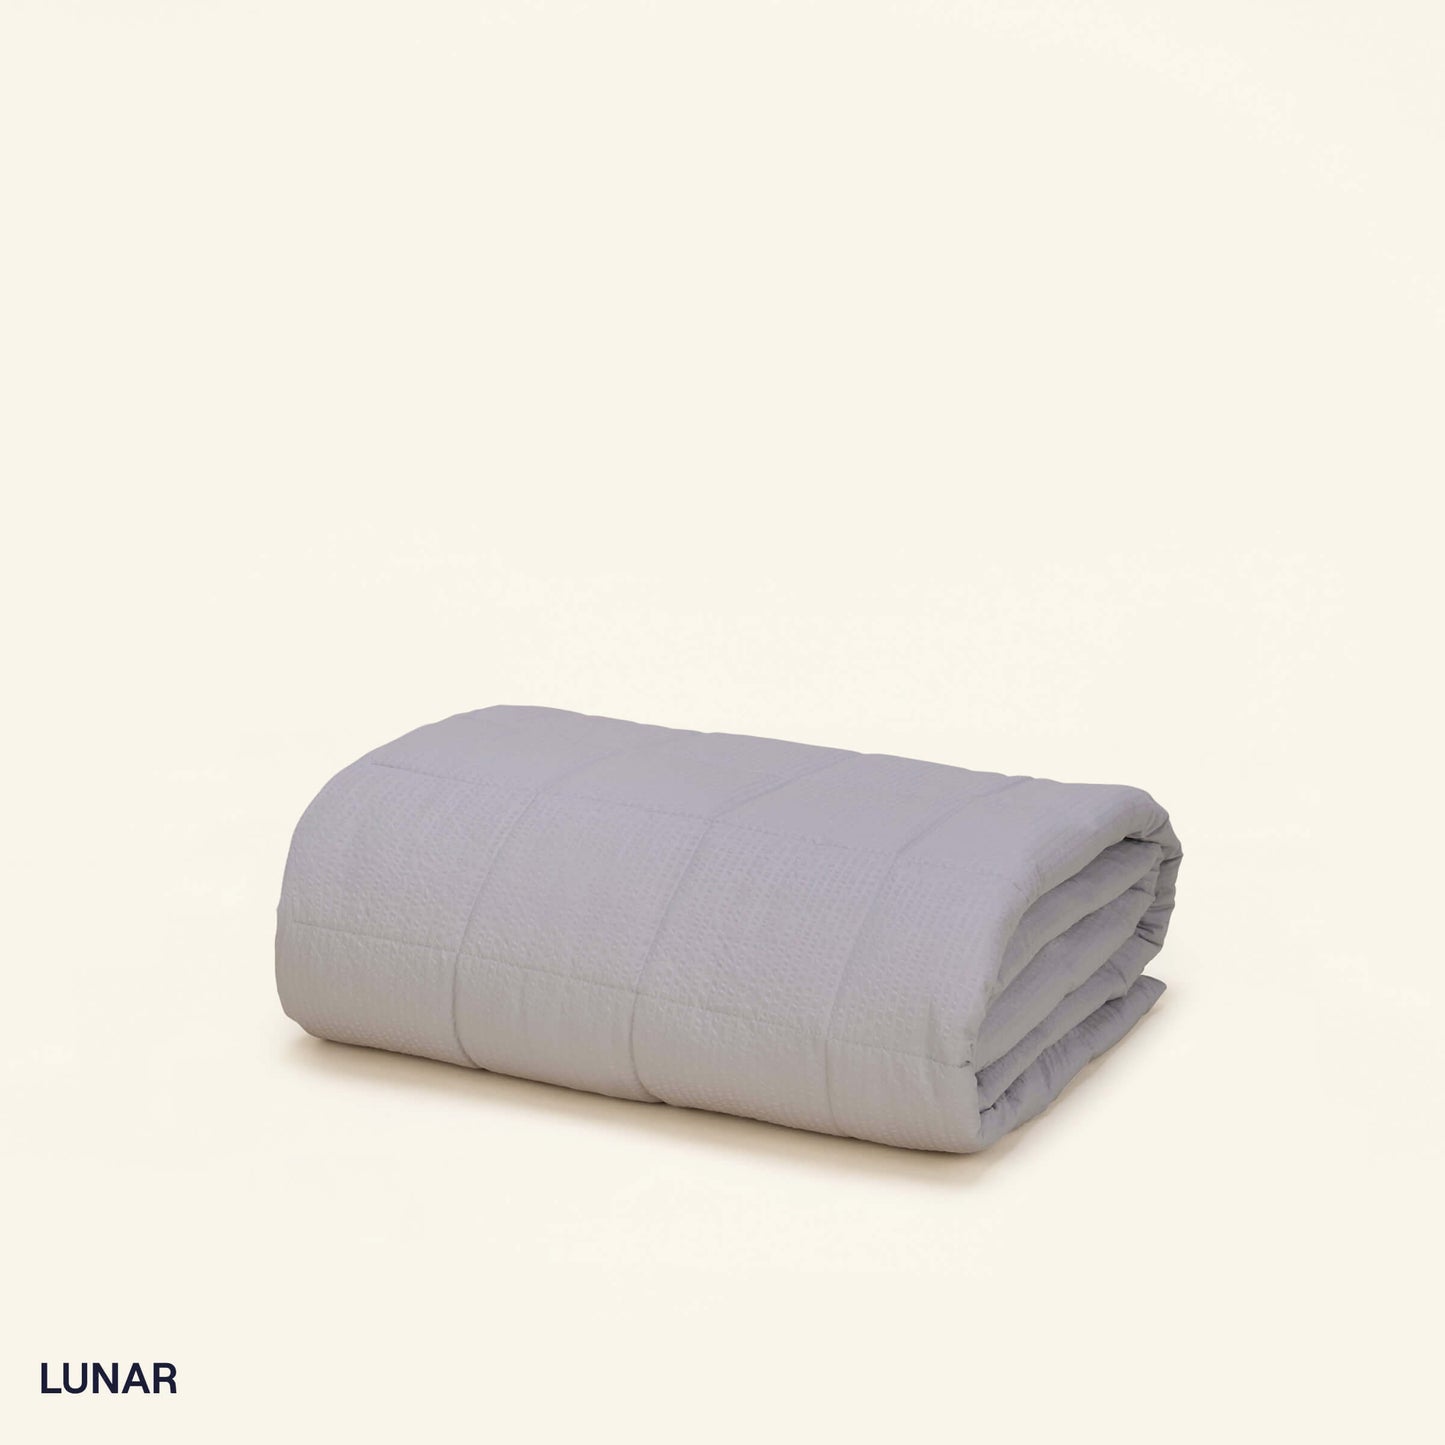 The Slumber Cloud Textured Blanket in Lunar made with Outlast Temperature Regulation Technology